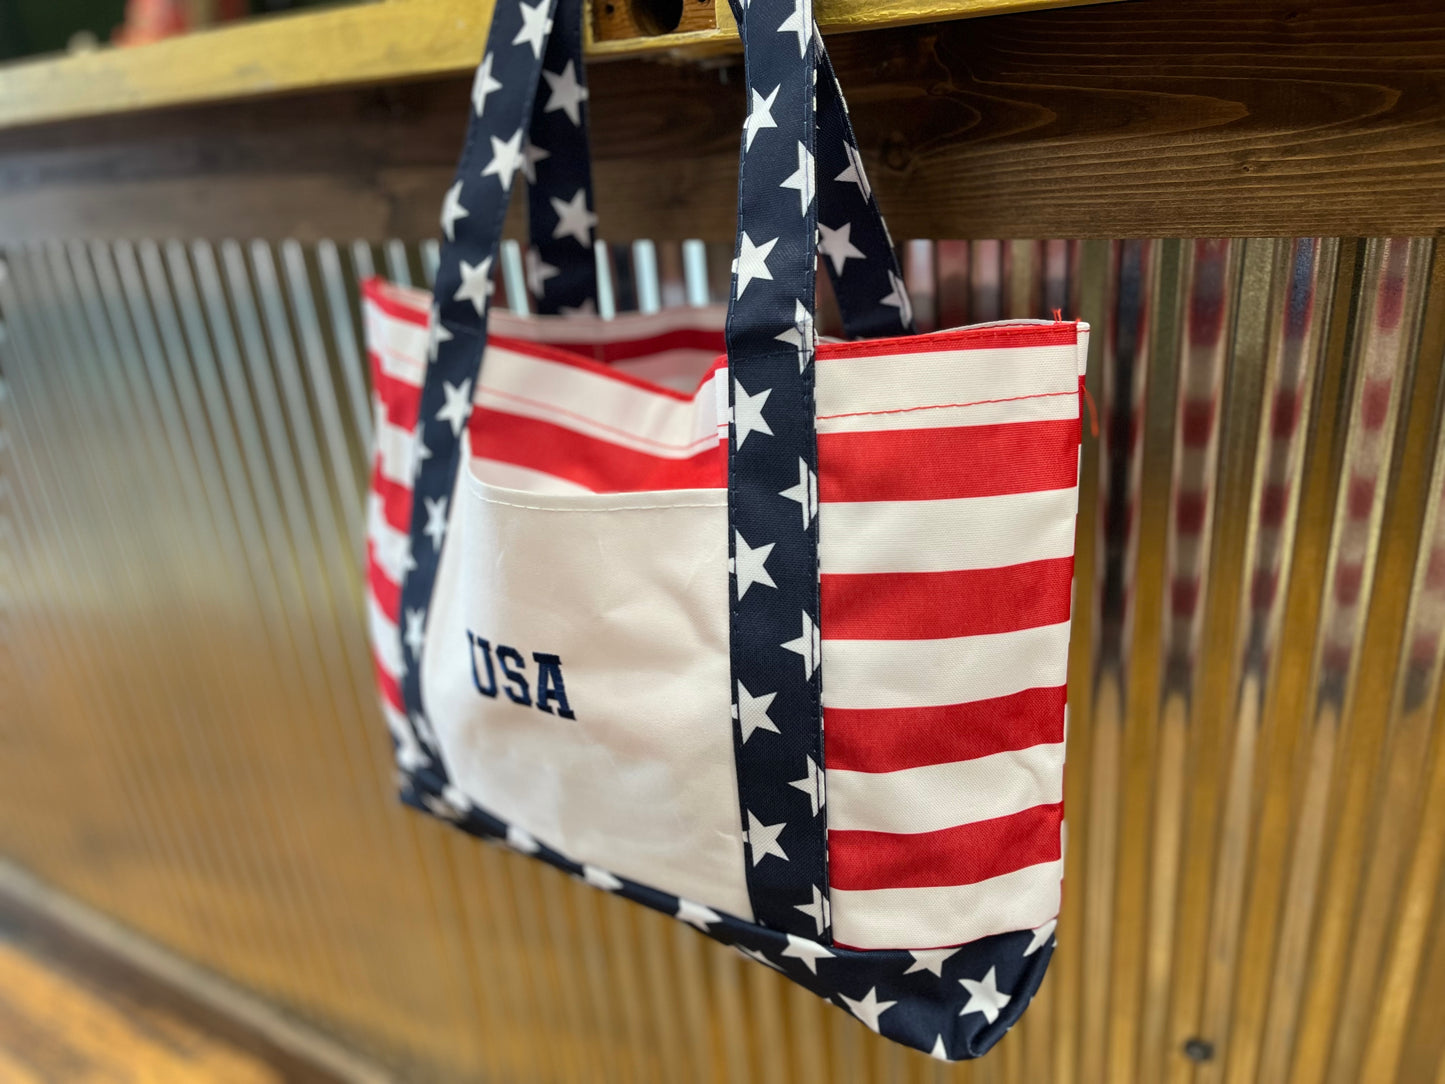 USA Boater Tote